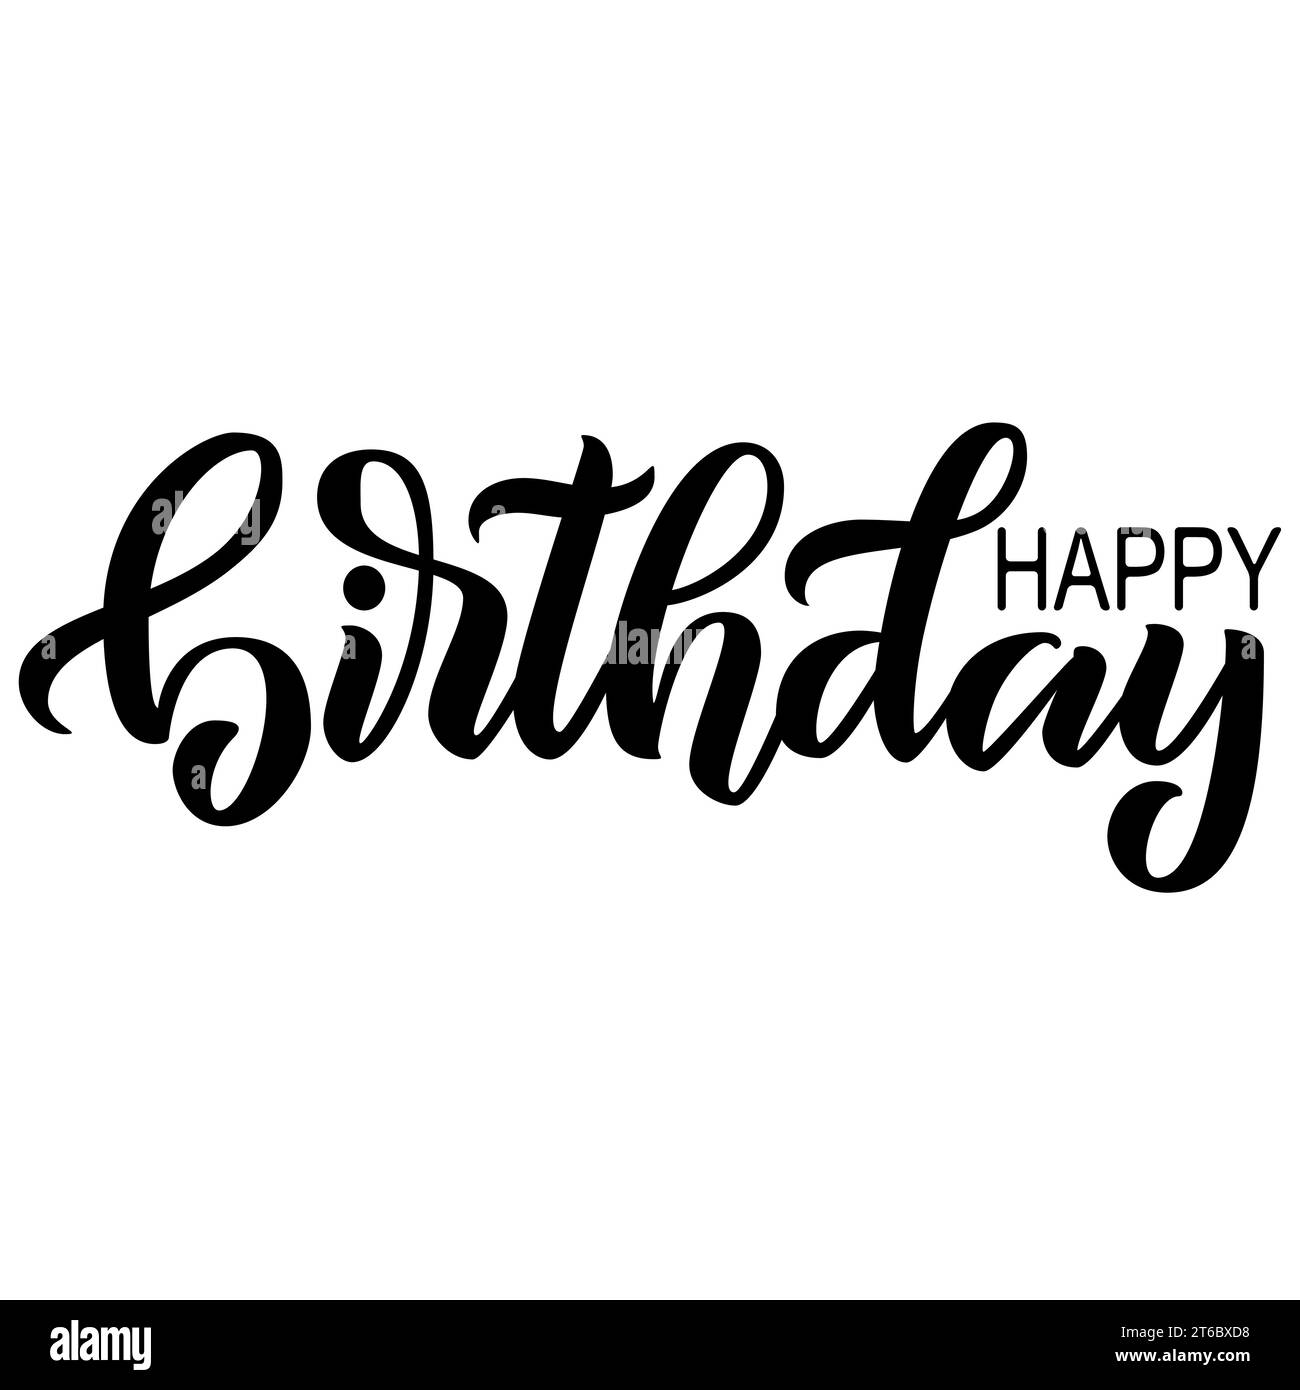 Happy birthday hand lettering, black brush letters isolated on white ...